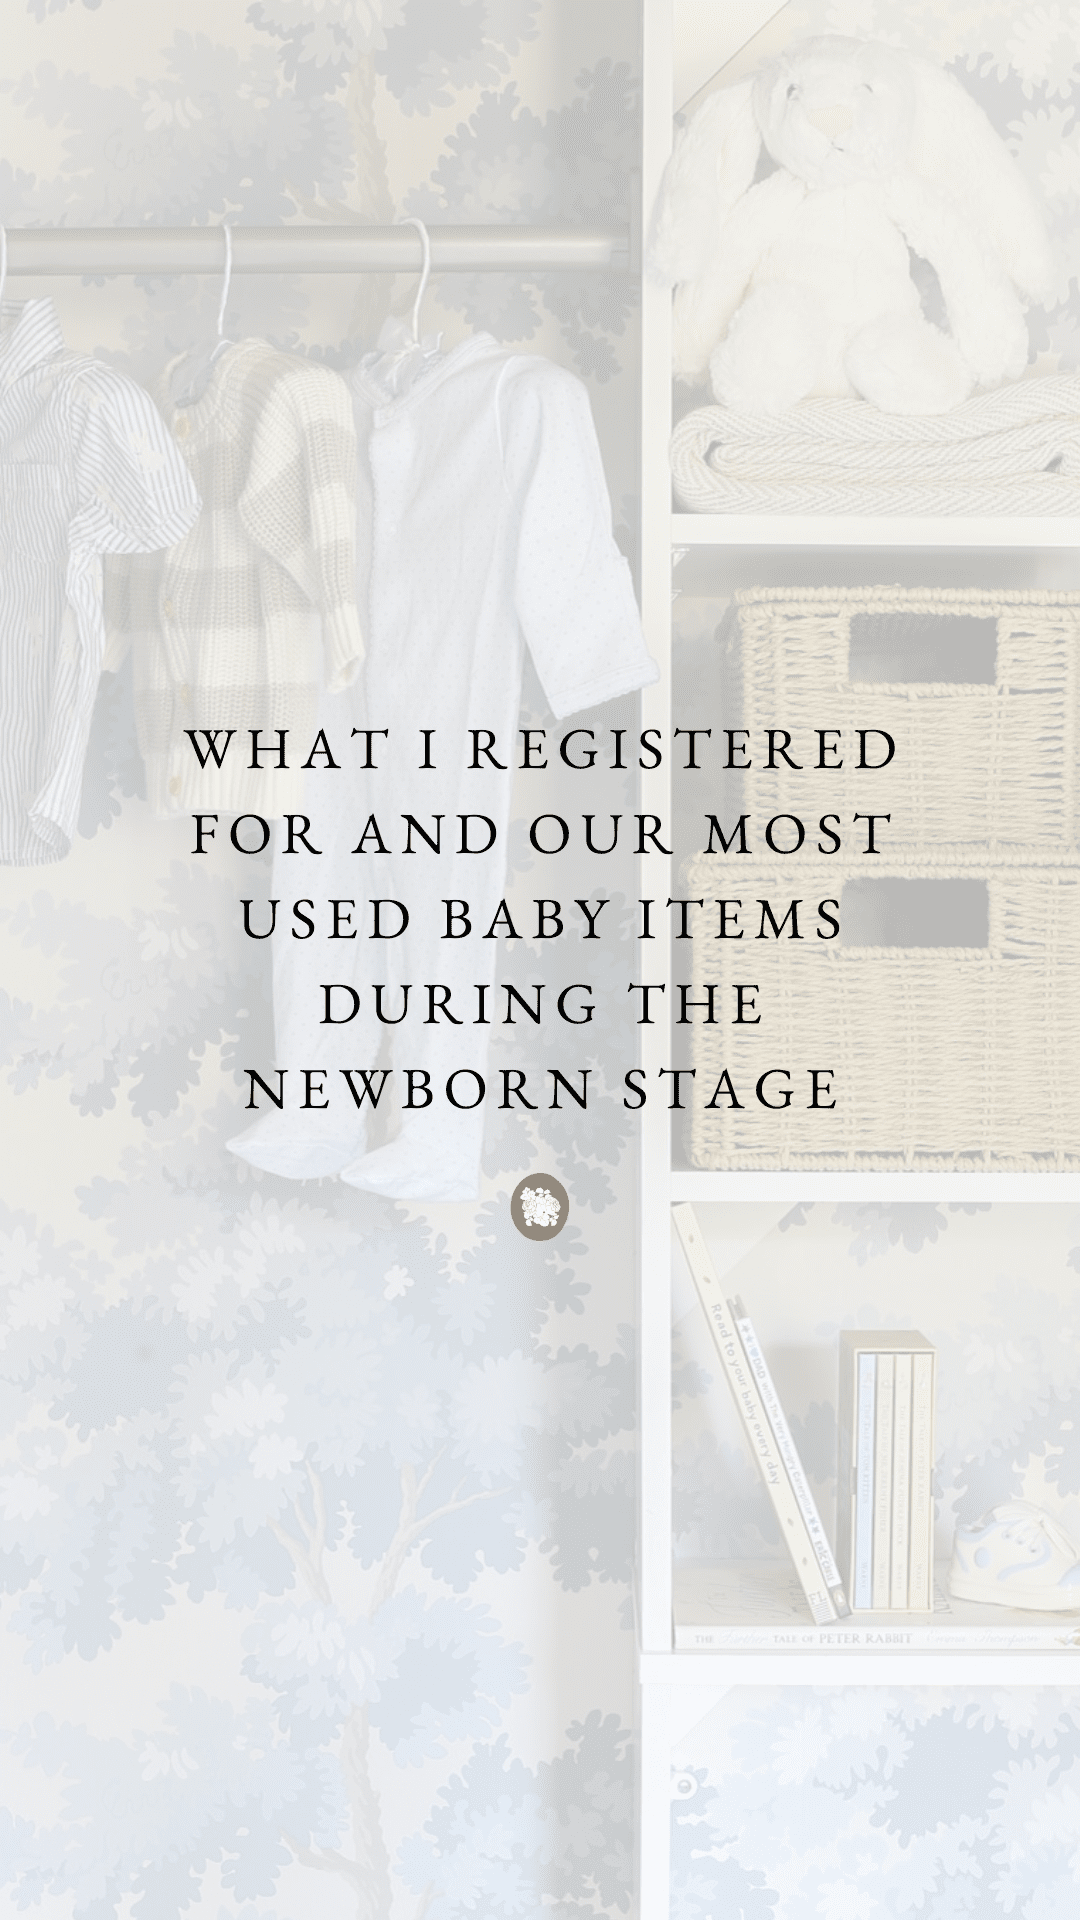 WHAT I REGISTERED FOR AND OUR MOST USED BABY ITEMS DURING THE NEWBORN STAGE